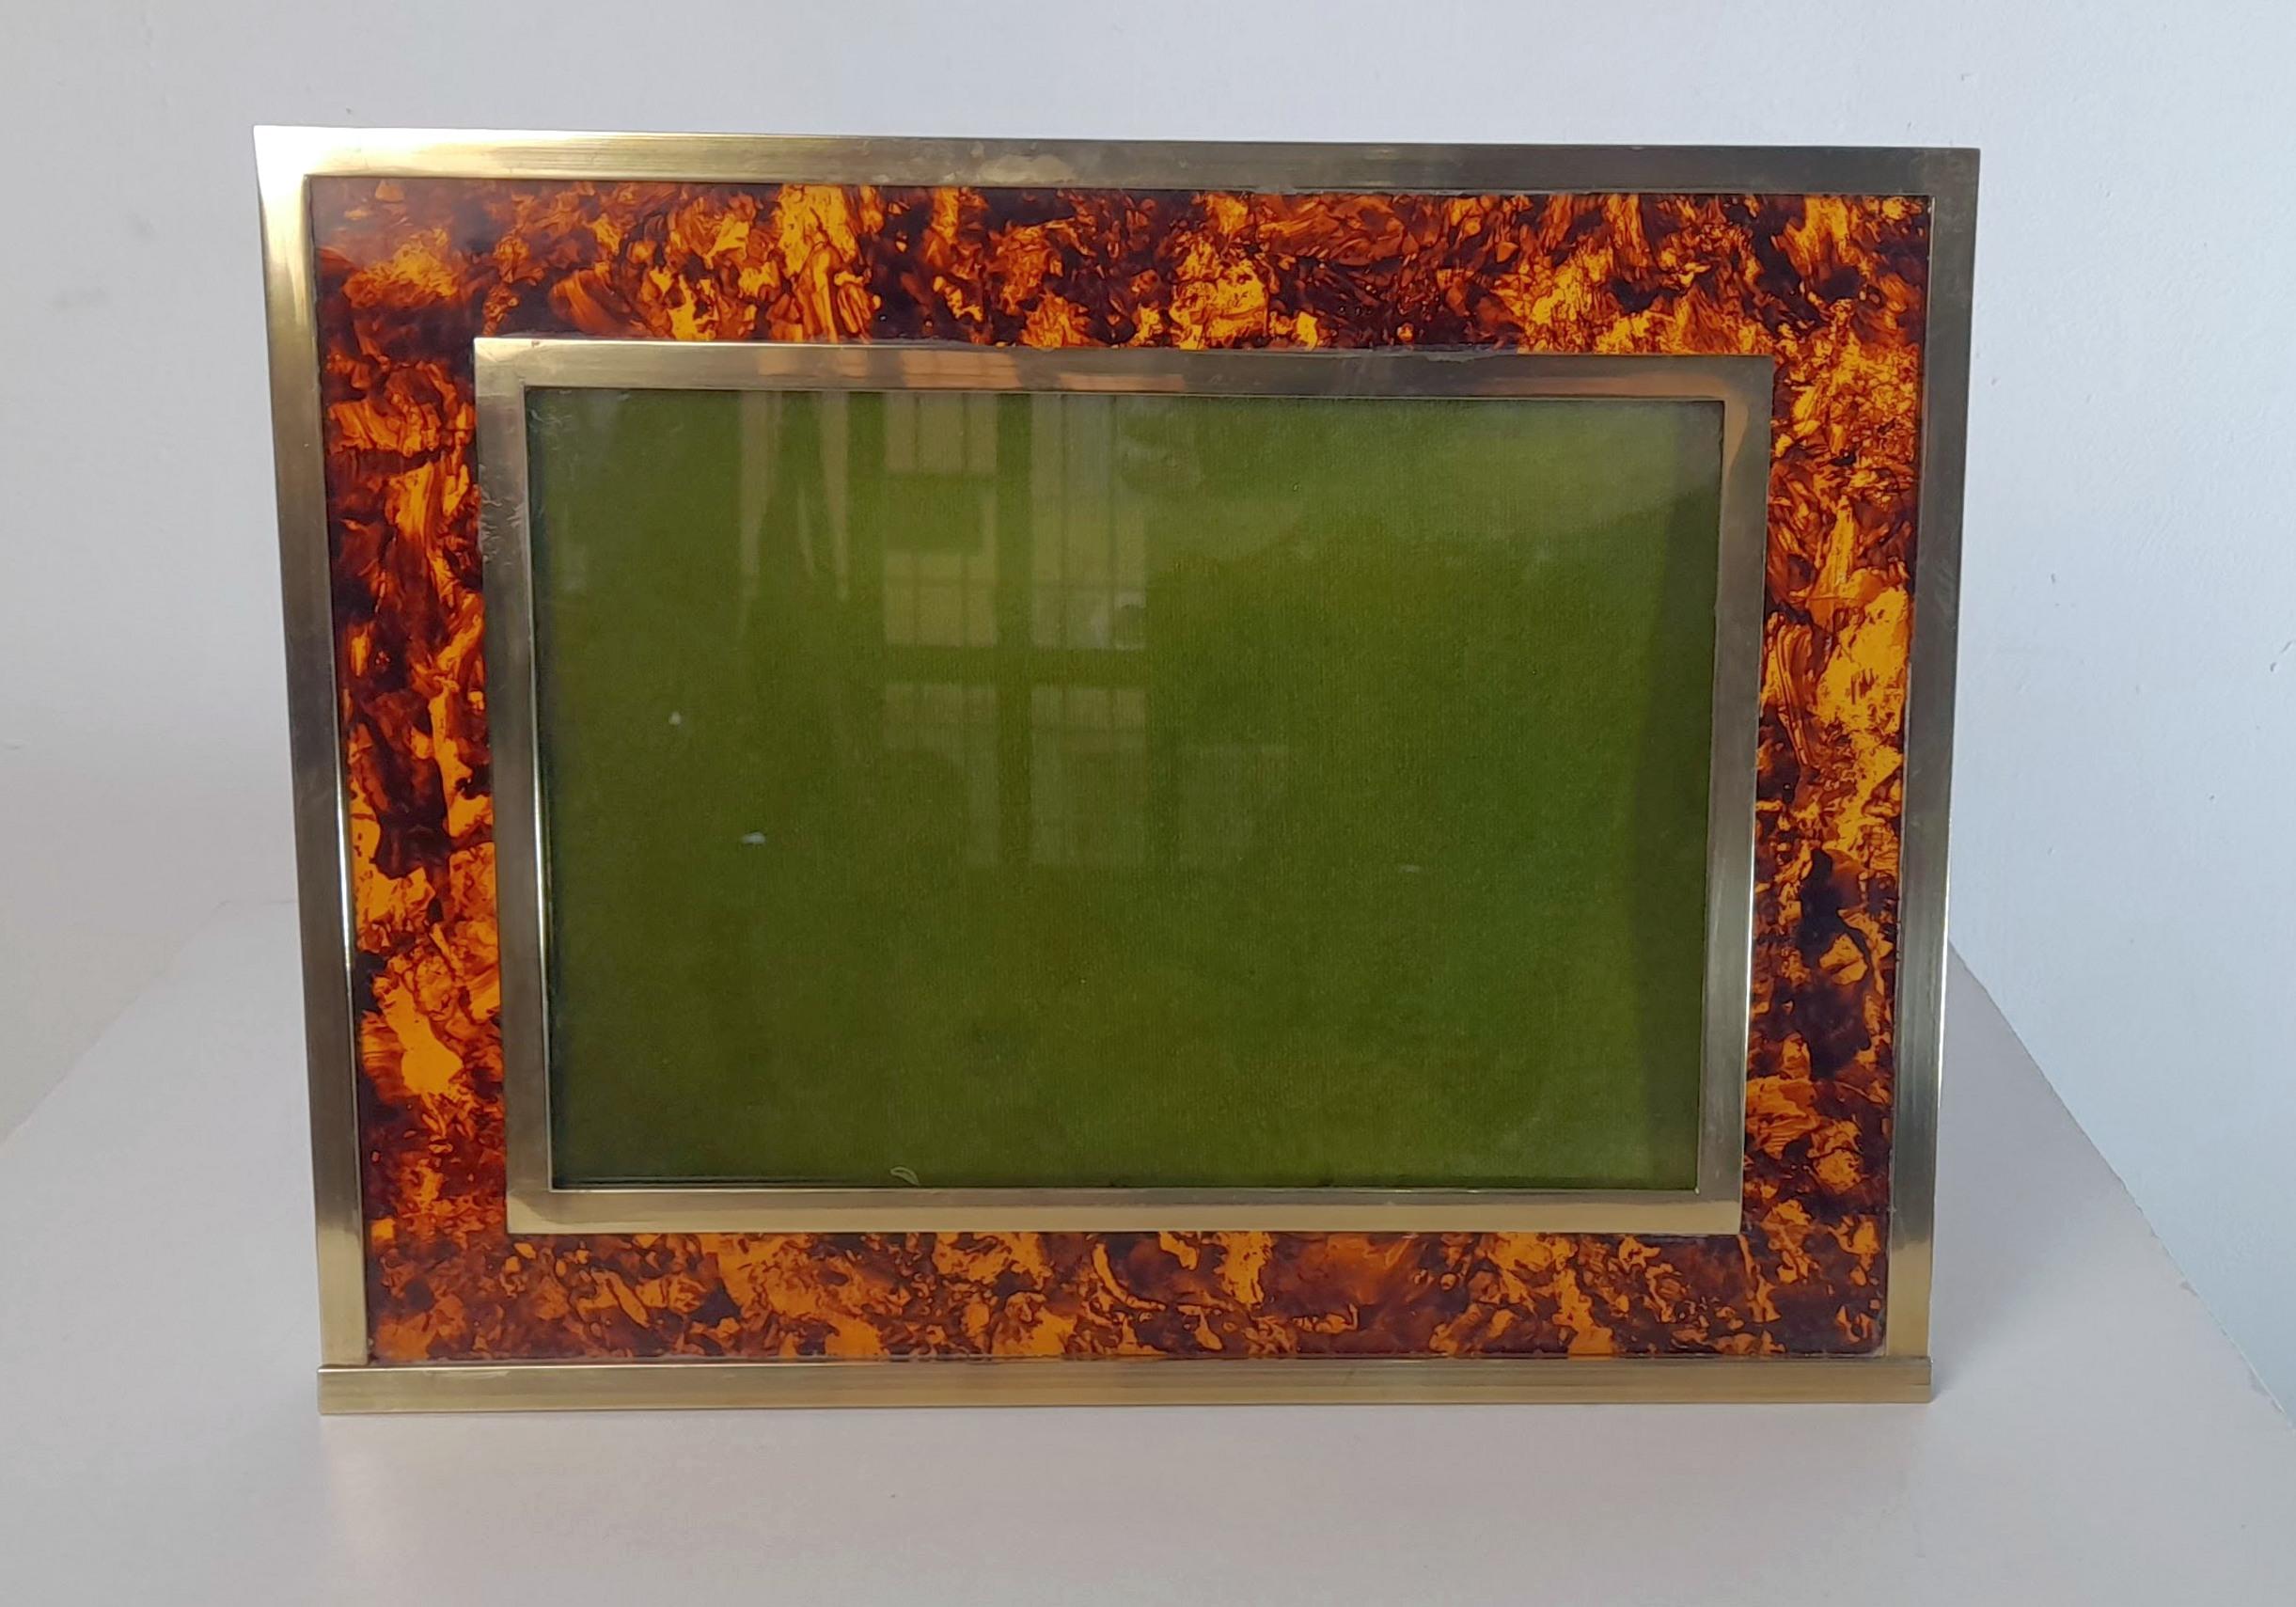 Italian handmade vintage Art Deco style photo/picture frame in lucite faux tortoiseshell lucite surrounded by brass. In nice condition. The frame has a glass in front of the space for the photo/artwork. Perfect for photos or a small work of art.